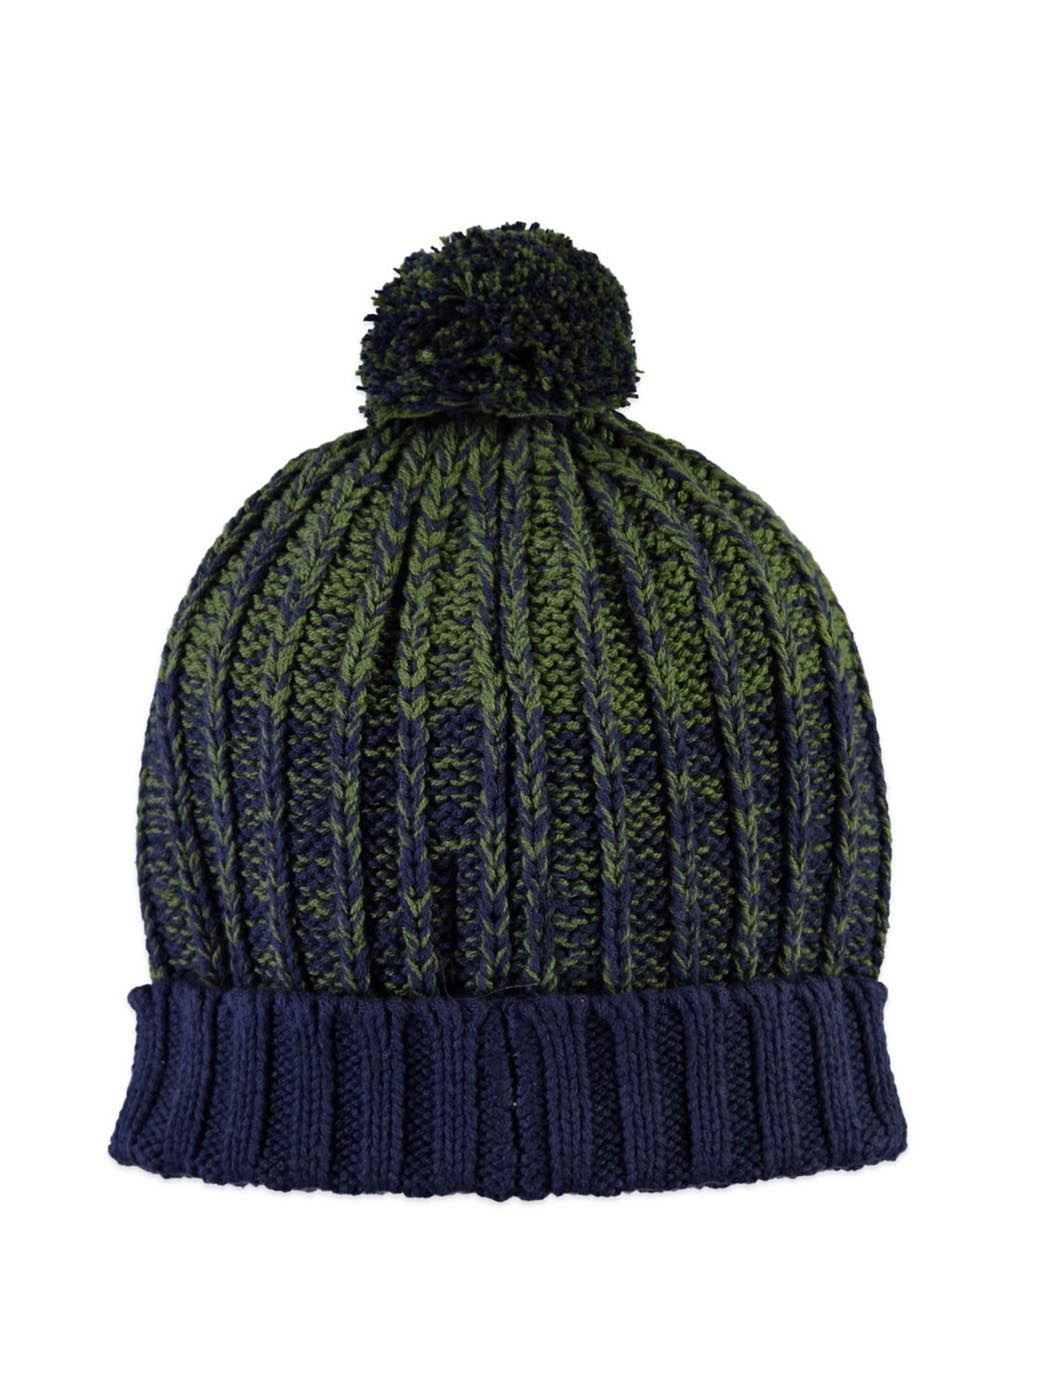 Babyface KNITTED Hat - 9207956 Multicolor